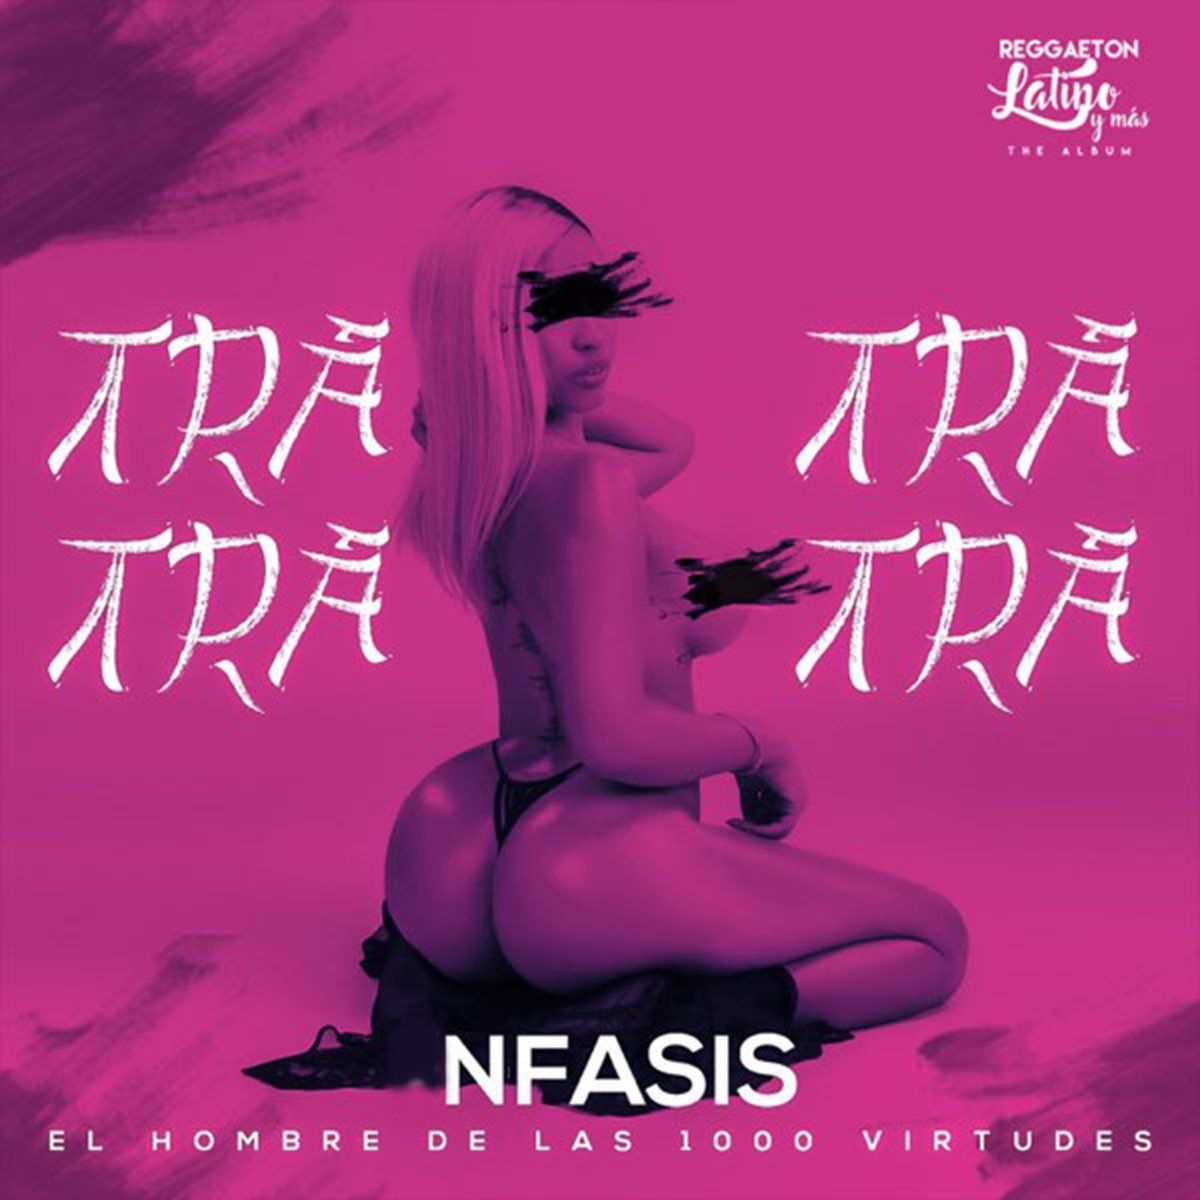 Tra Tra - Single by Nfasis on Apple Music